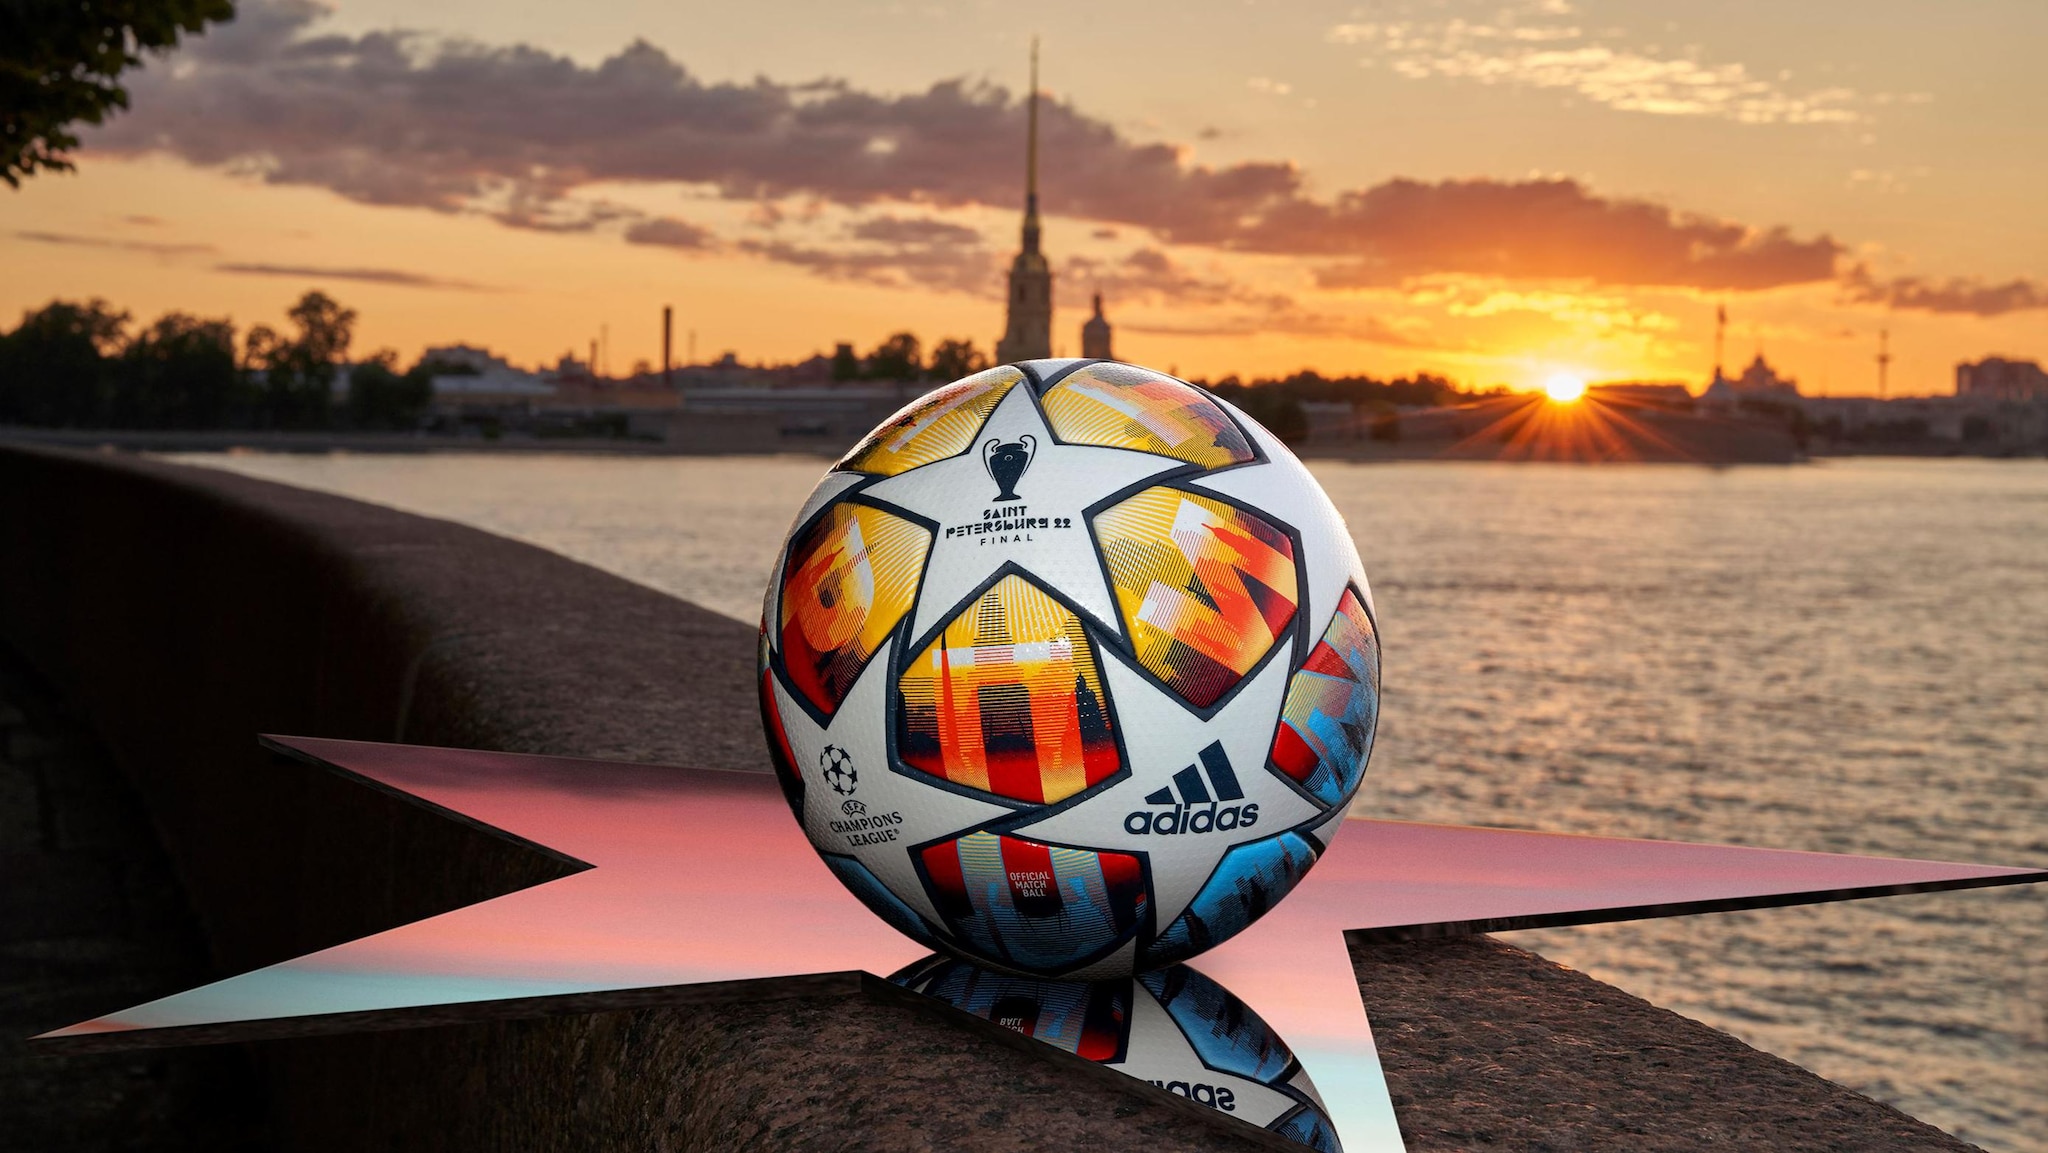 adidas reveals official match ball for 2022 UEFA Champions League final UEF...